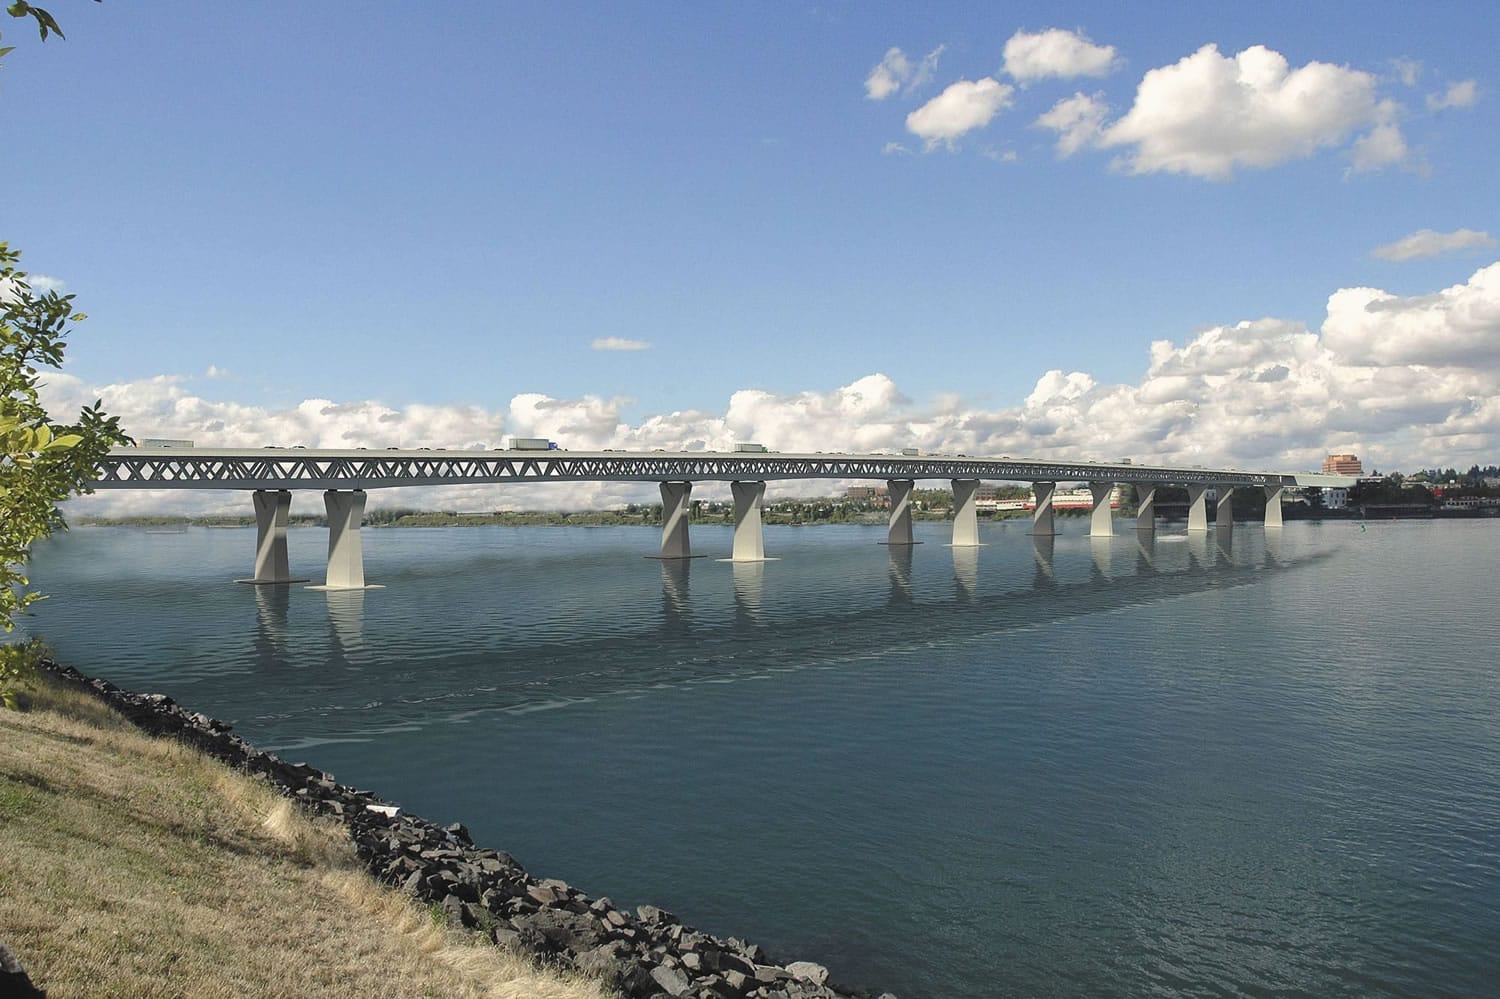 The deck truss style for the new Interstate 5 bridge is depicted in an artist's rendering.